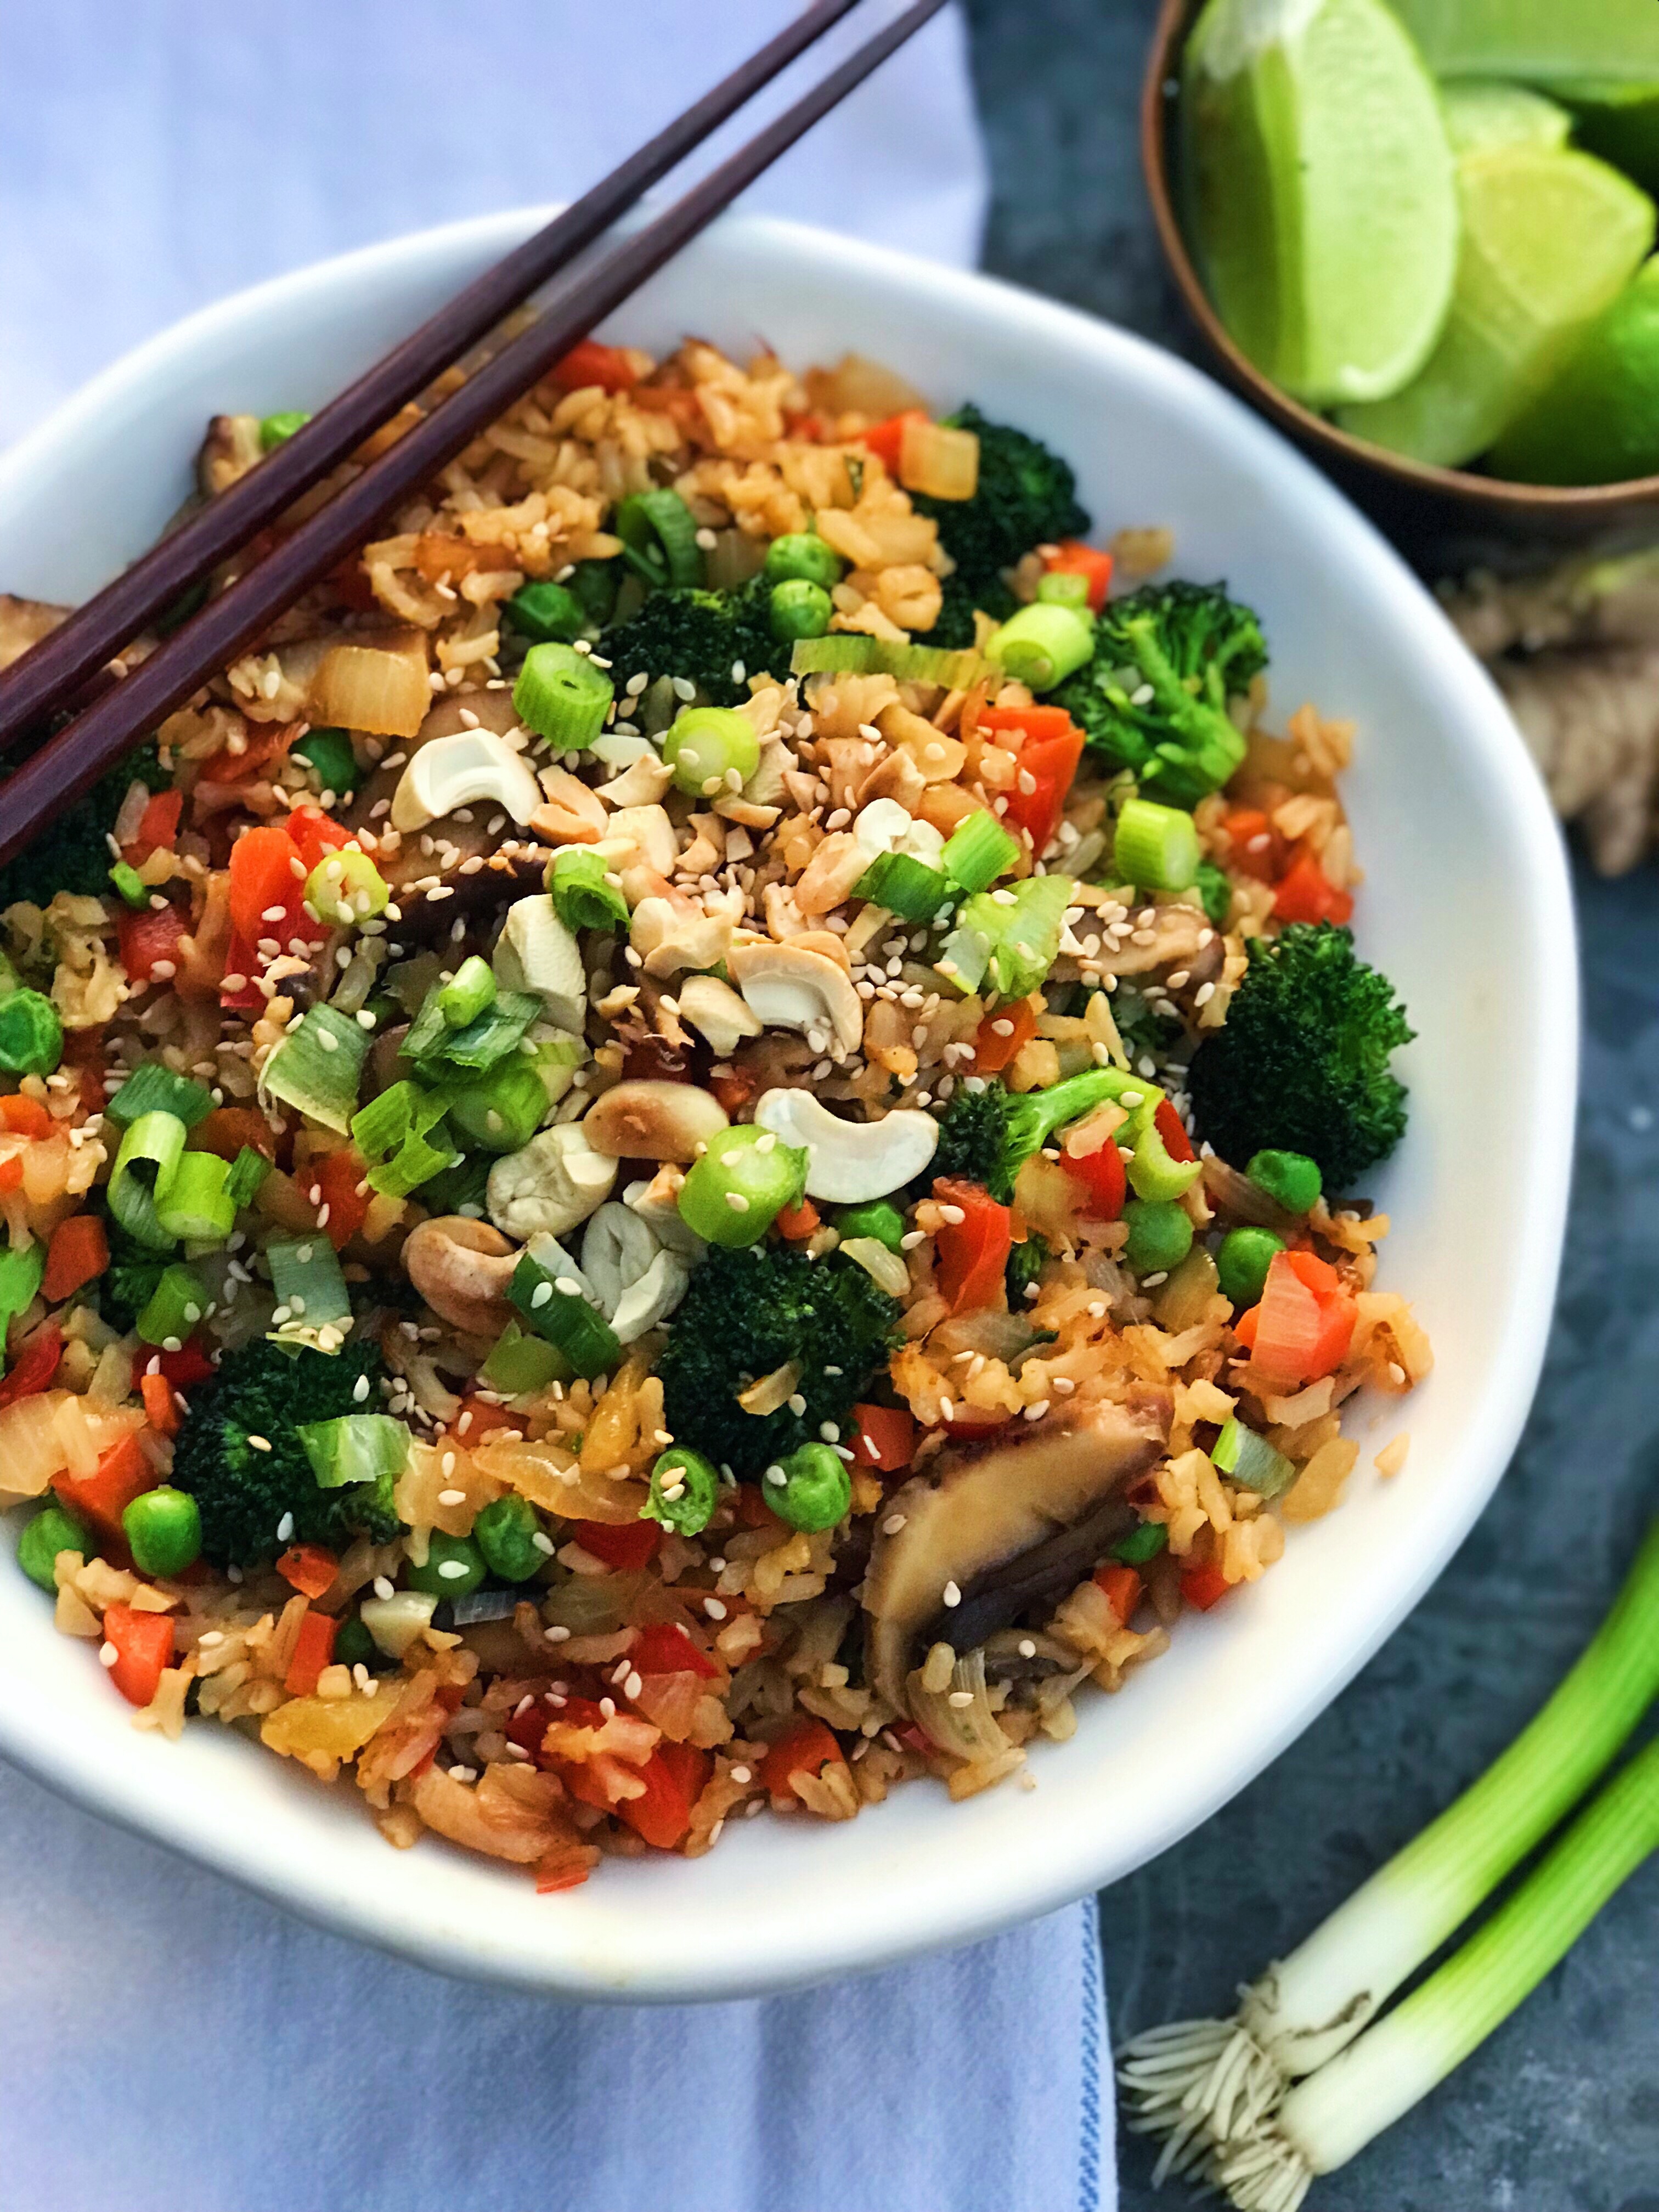 The Thai Fried Rice Bowl is fresh, simple, and delicious.